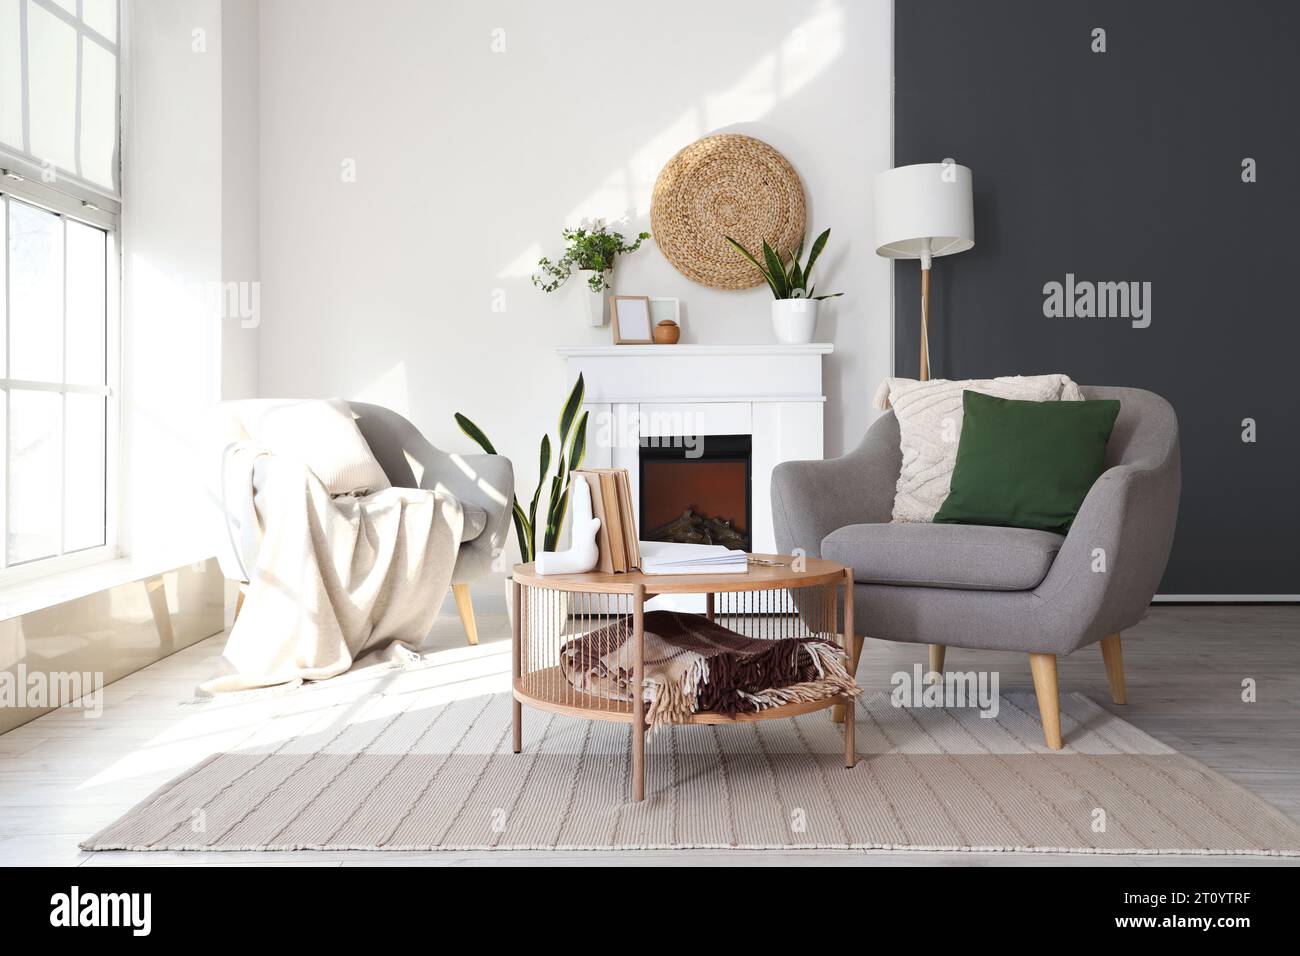 Interior of bright living room with armchairs, coffee table and fireplace Stock Photo